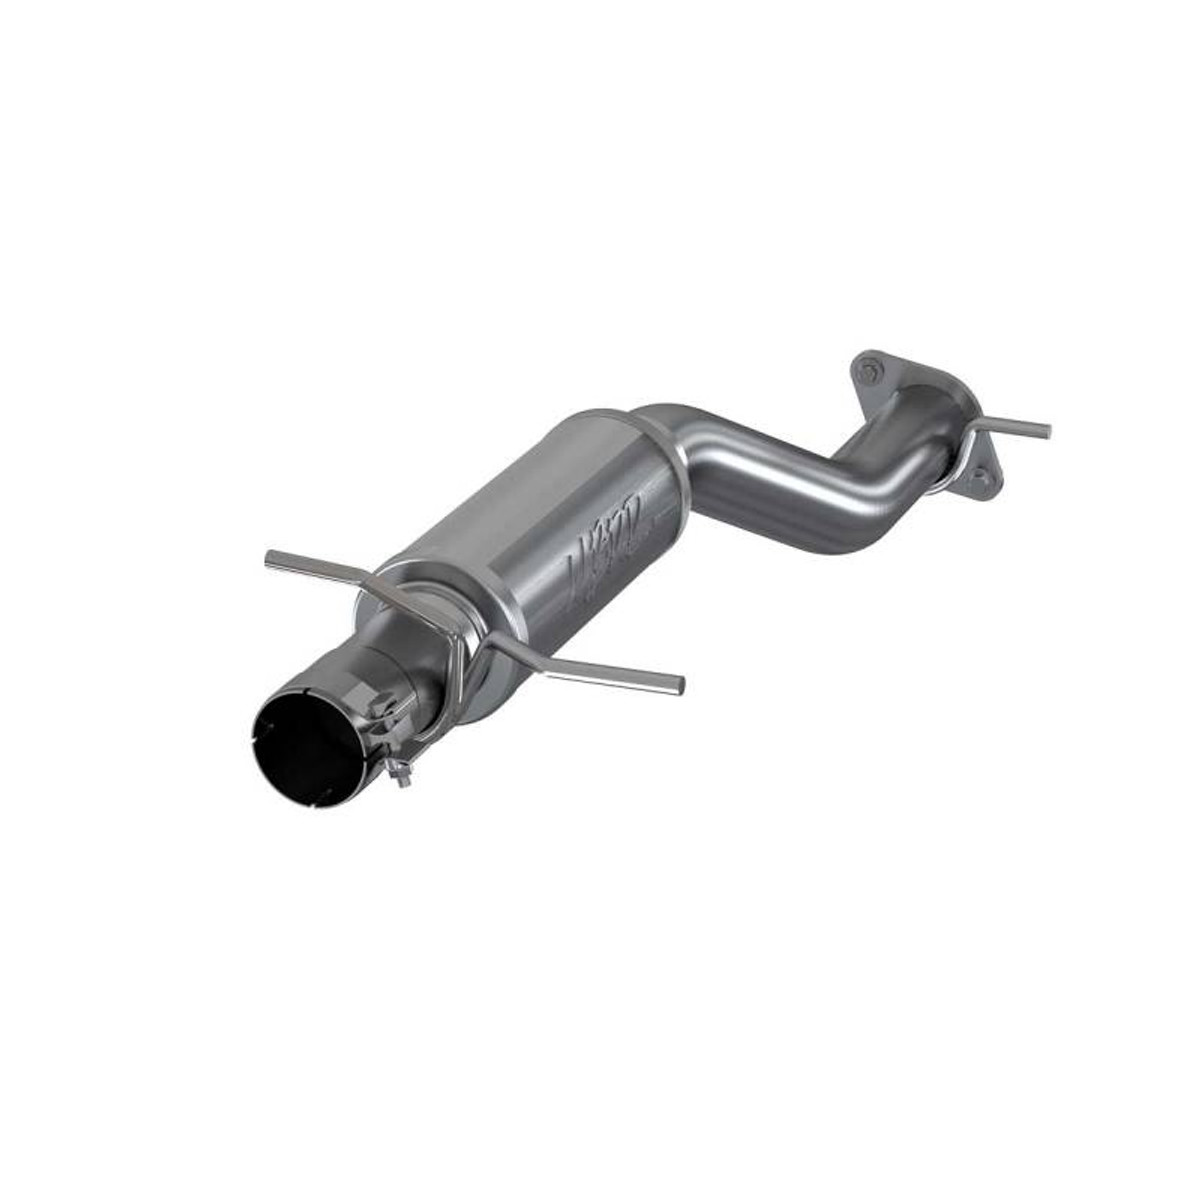 MBRP XP Series - 3 Inch - T409 SS - Single In/Out Muffler Replacement - 2019-2020 RAM 1500 5.7L Hemi S5143409